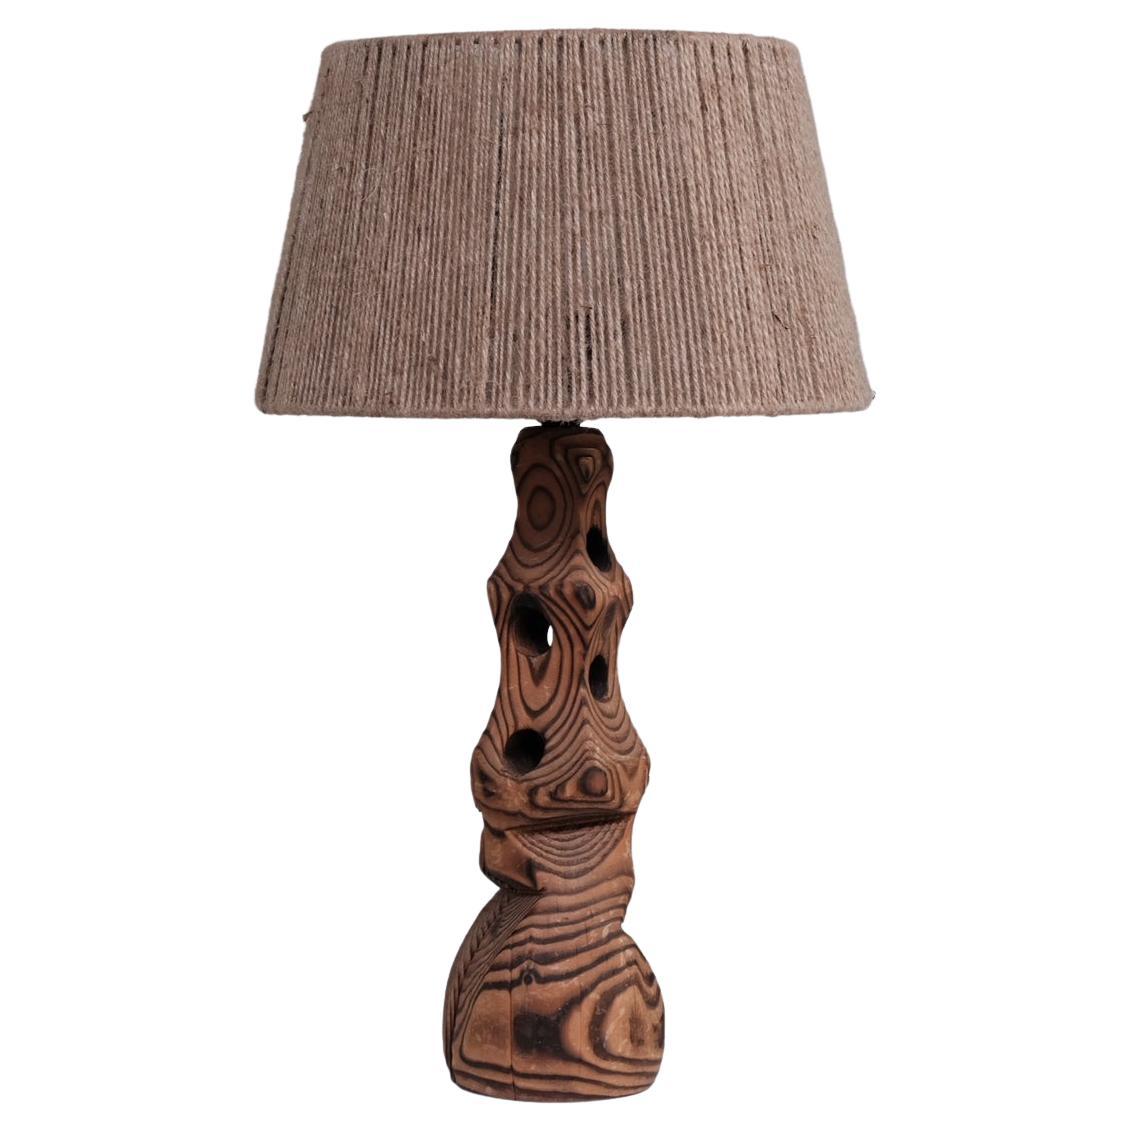 French Mid-Century Organic Form Sculptural Table Lamp